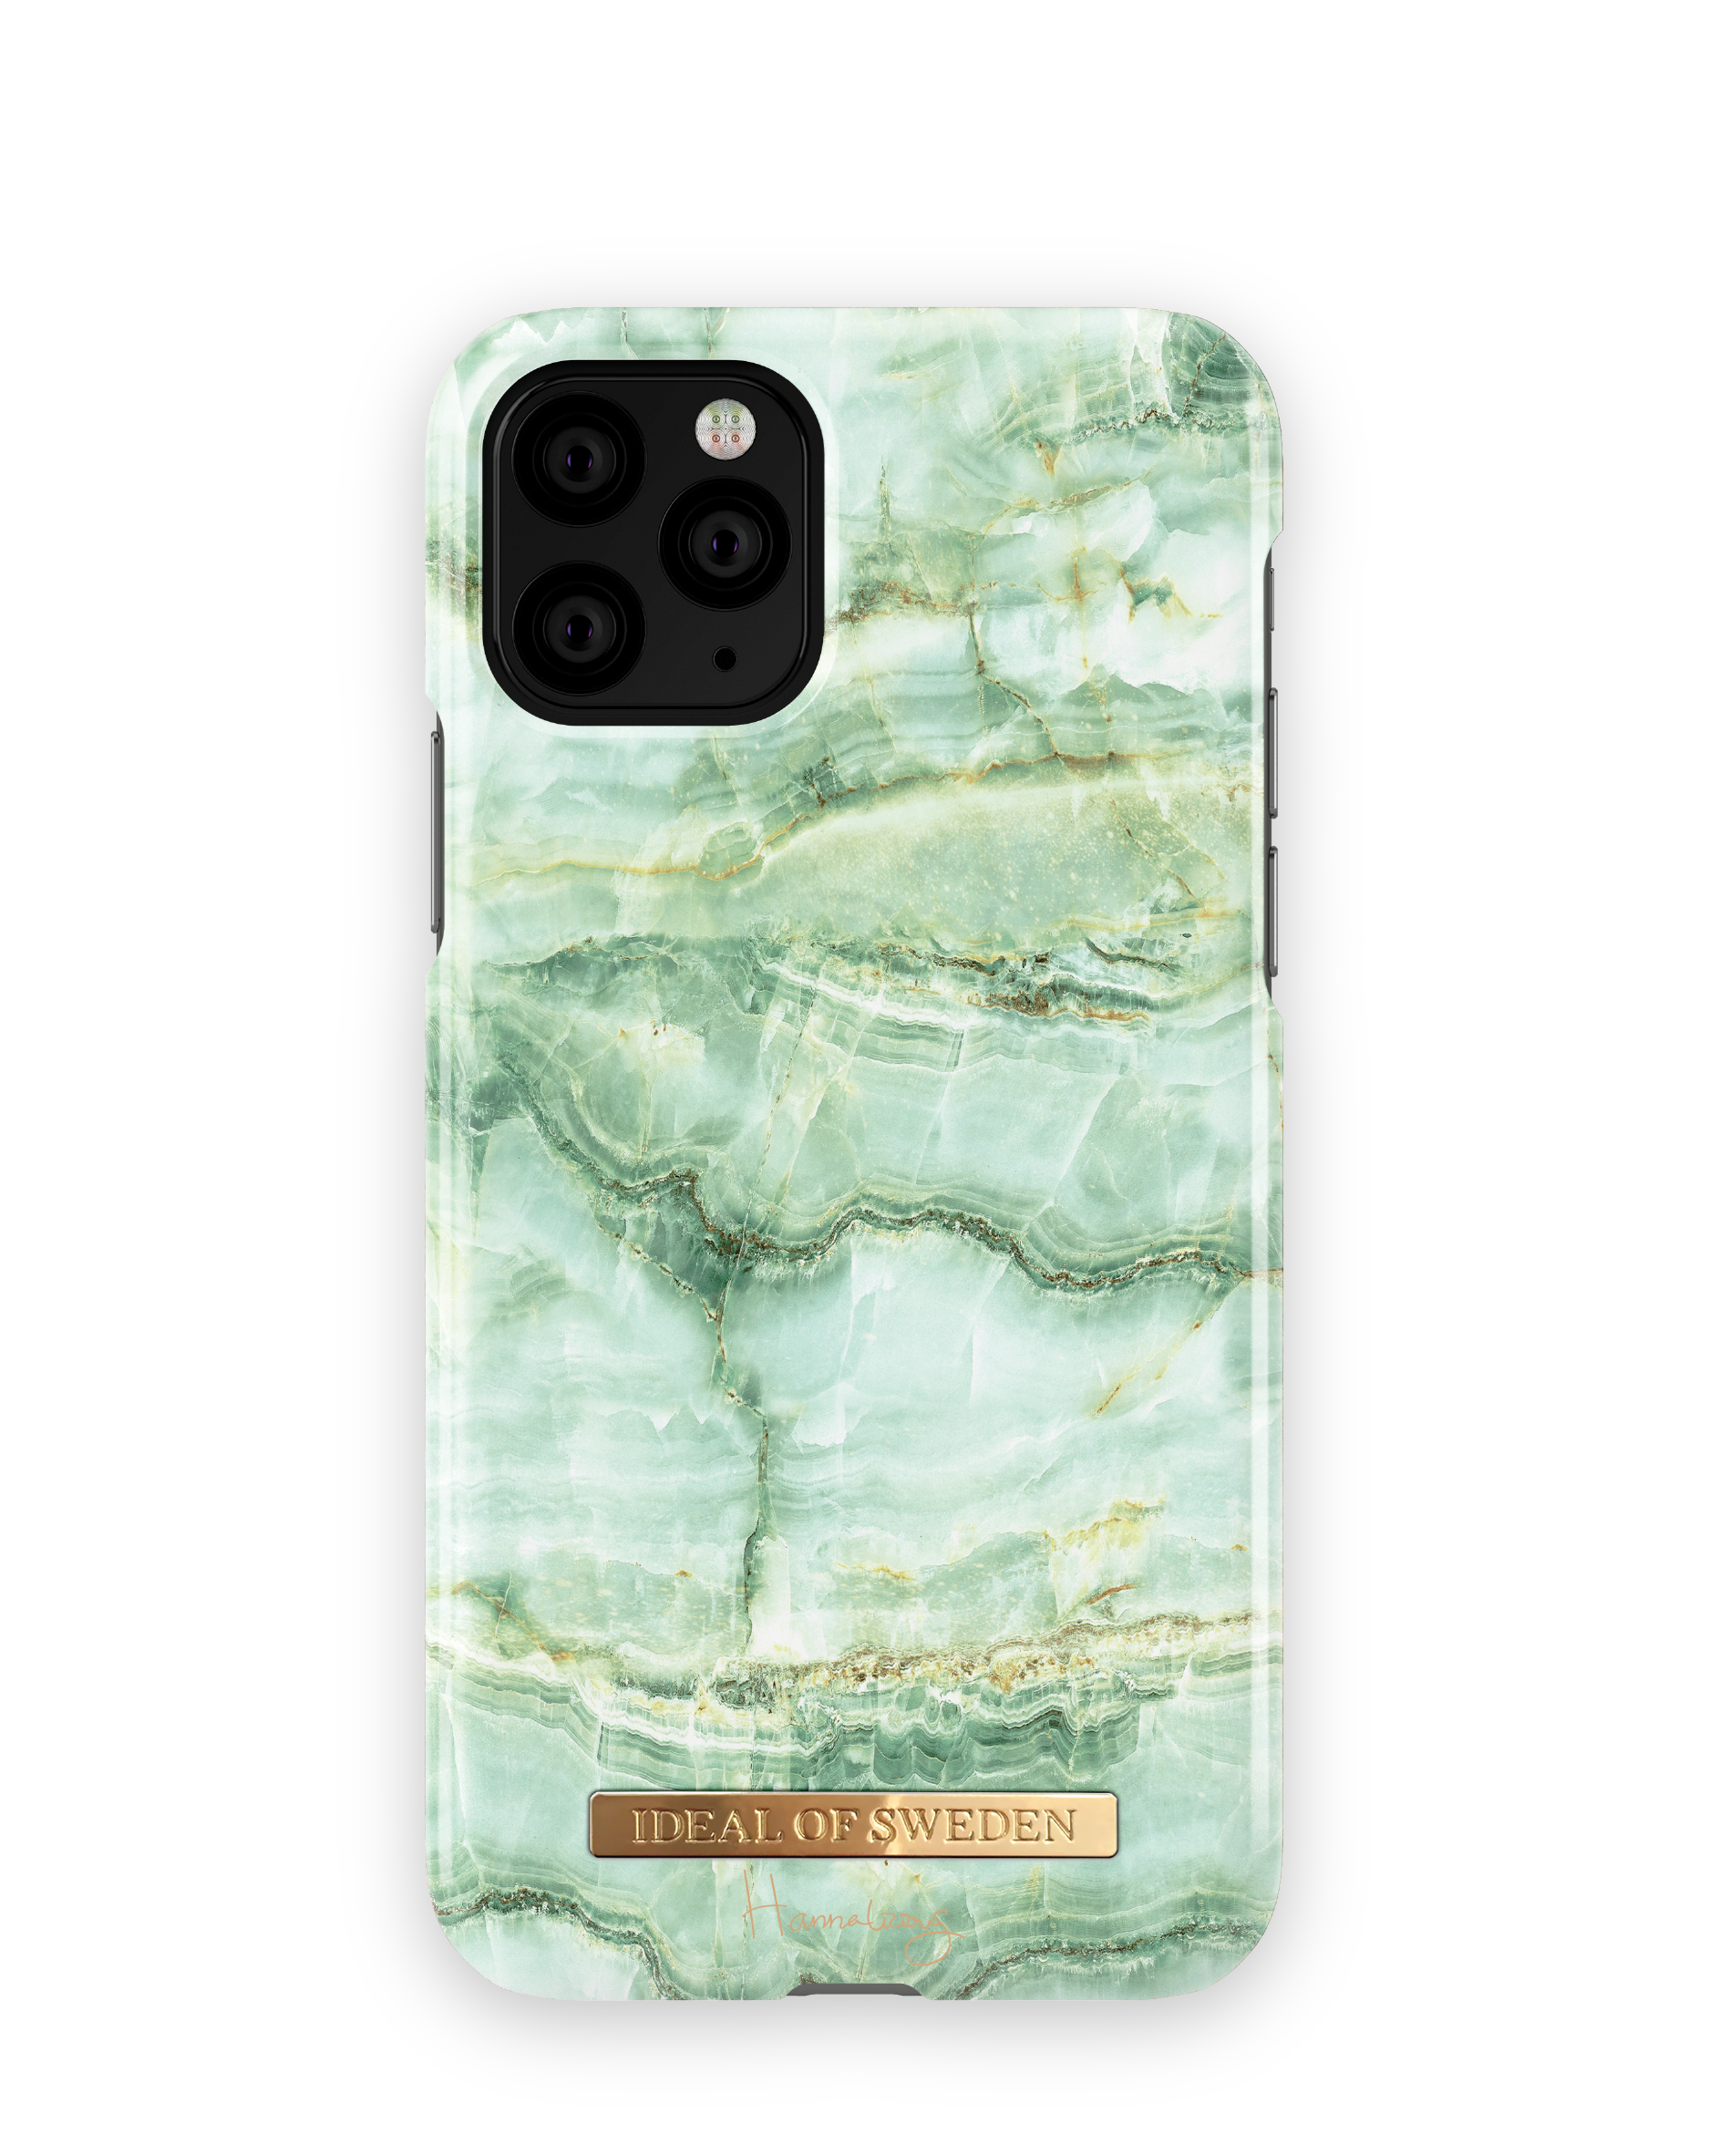 iPhone iPhone iPhone Pro, Marble OF IDEAL Apple IDFCH2-I1958-125, Mojito SWEDEN XS, Backcover, Apple, X, Apple Apple 11